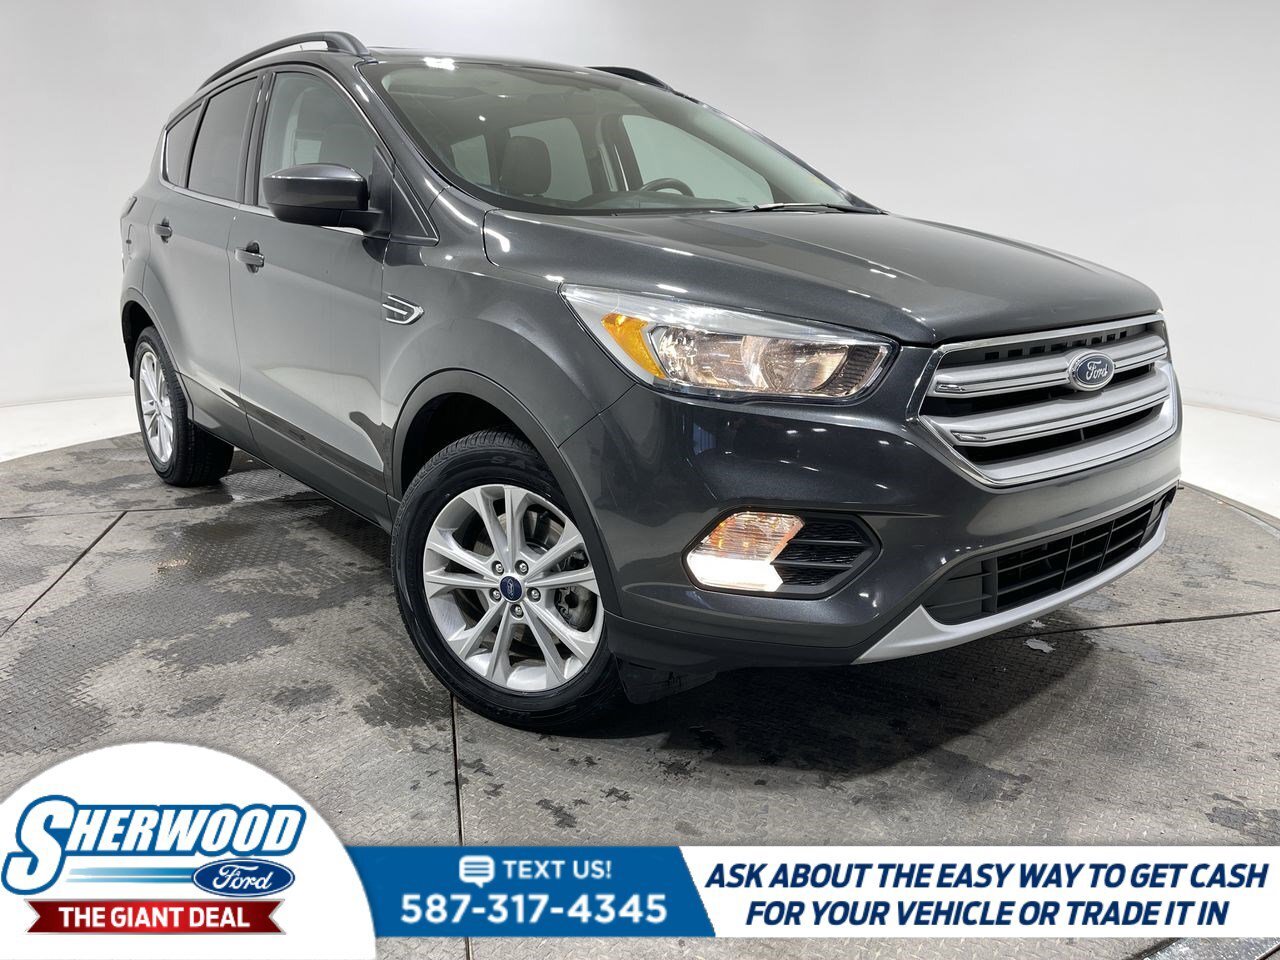 2018 Ford Escape SE 4WD - $0 Down $86 Weekly - MOONROOF - NAV